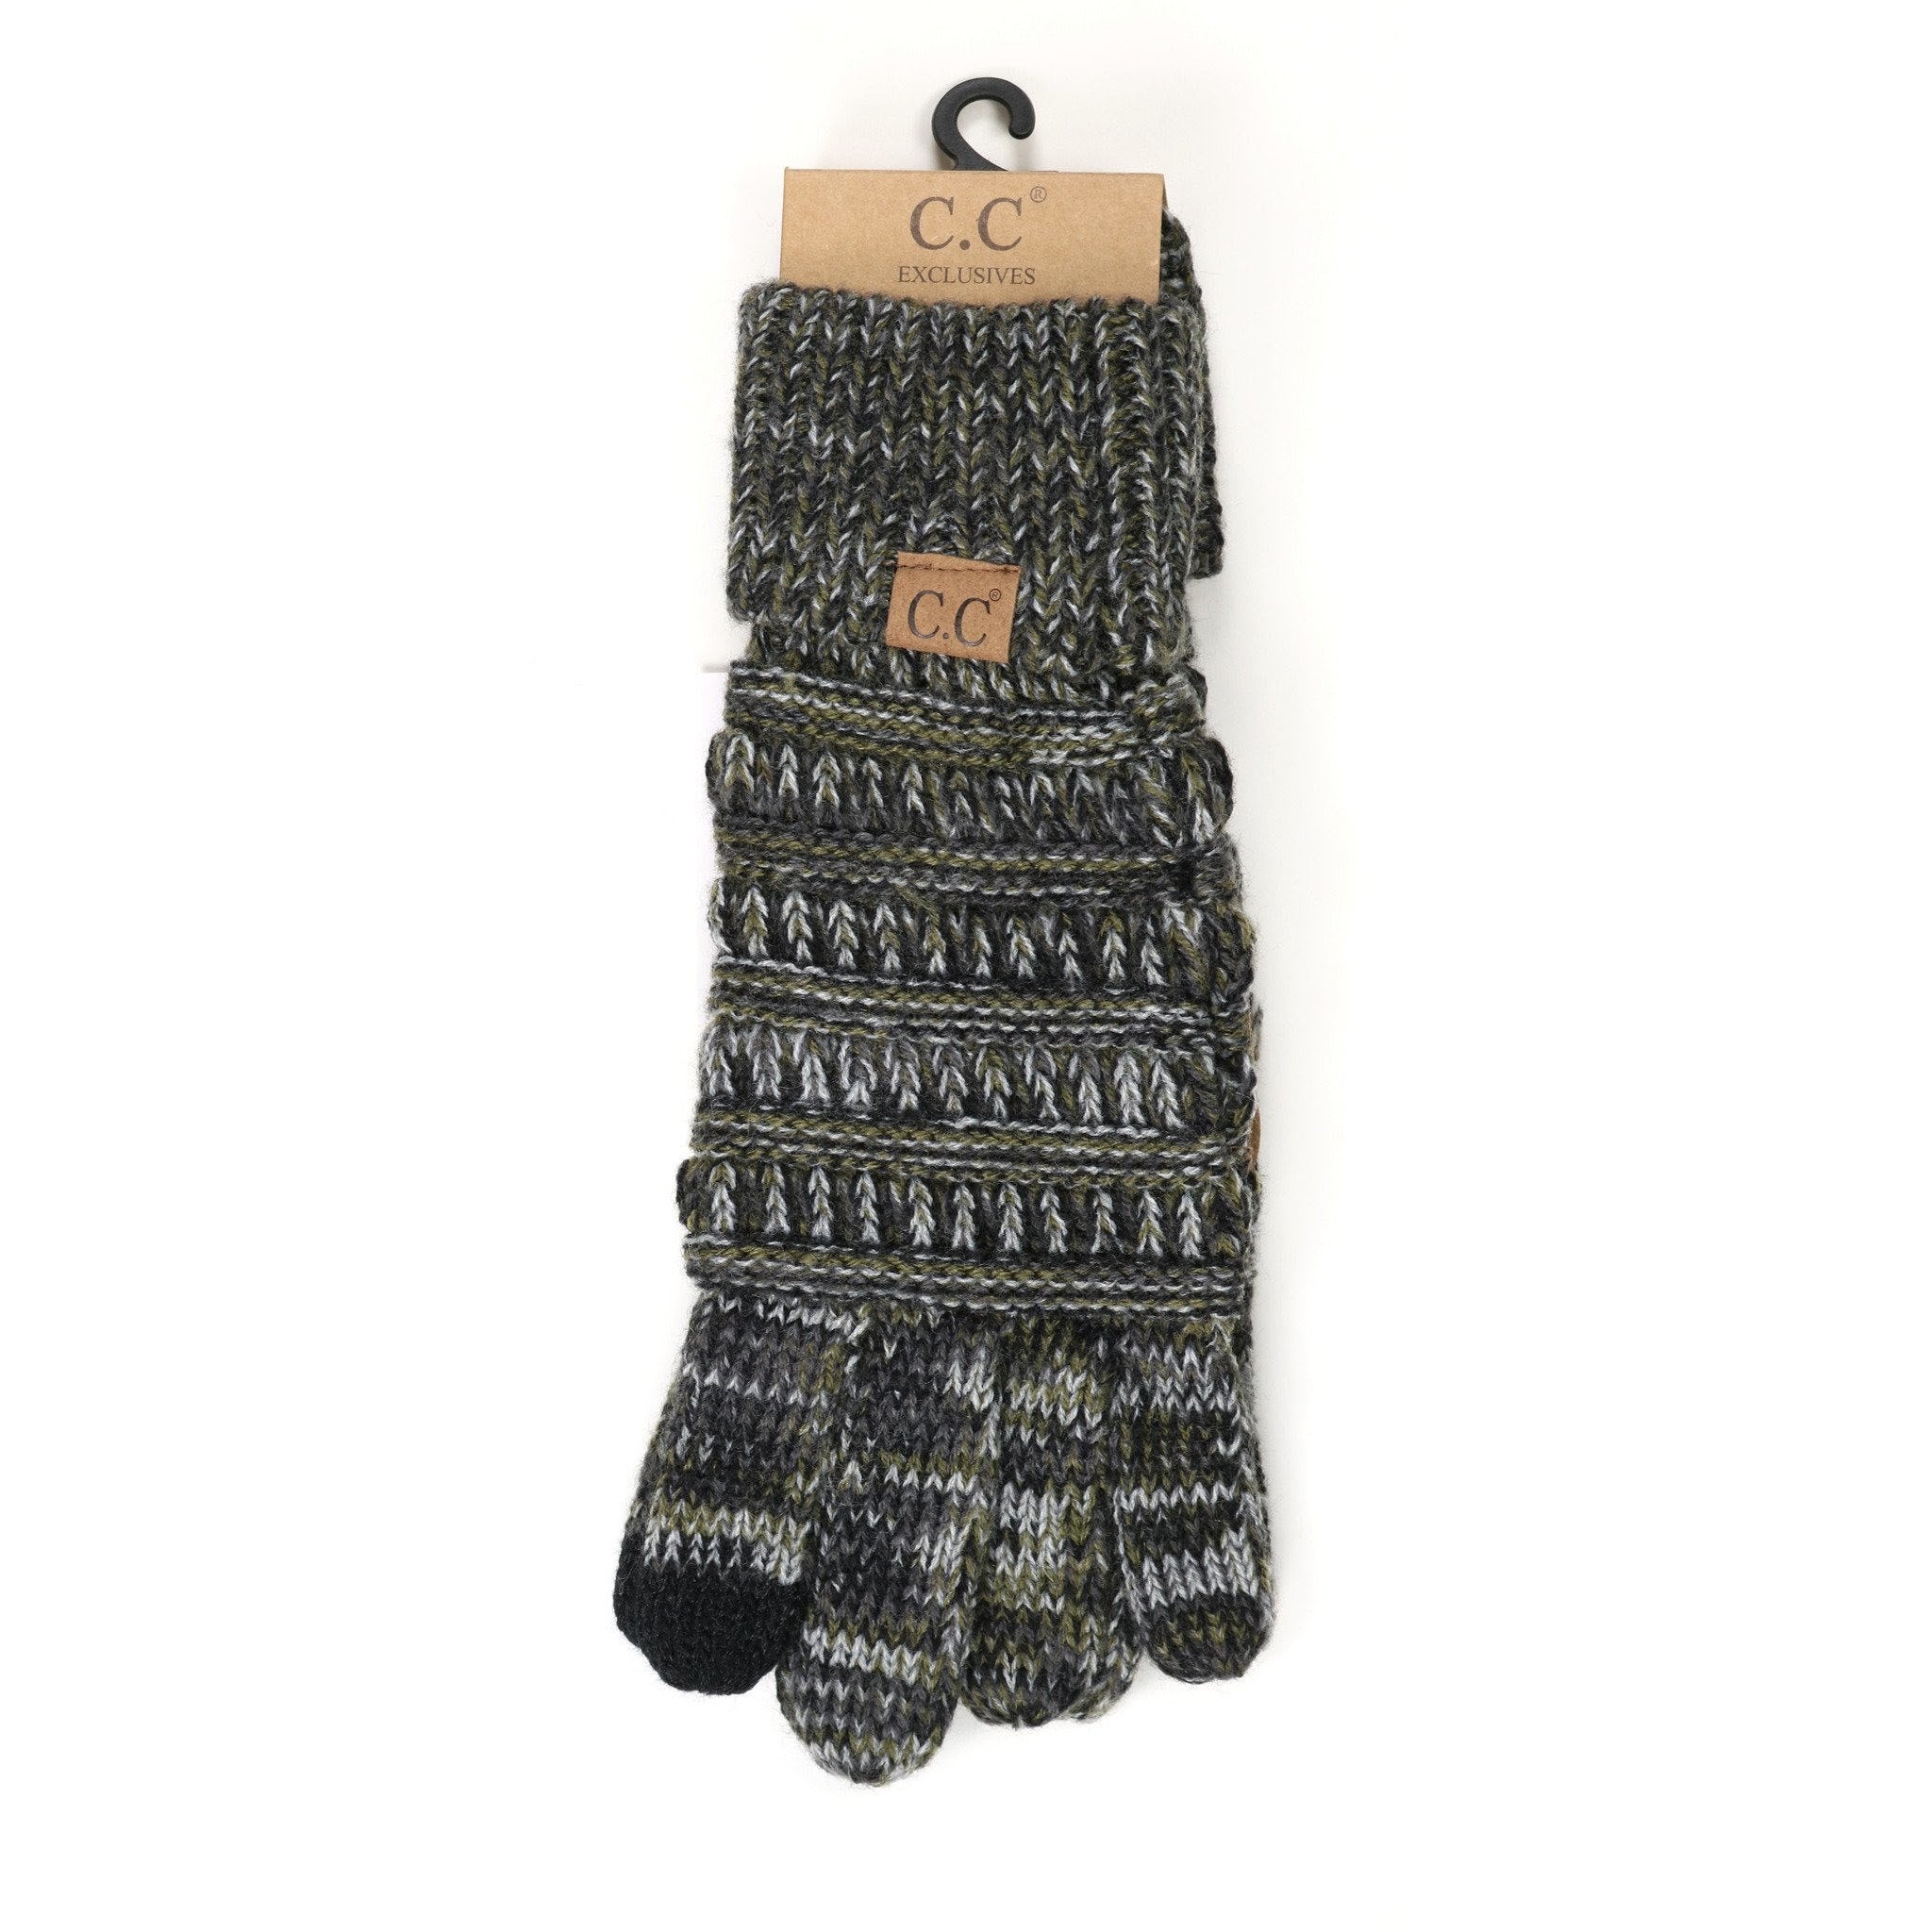 C.C Four-Tone Gloves - Charcoal